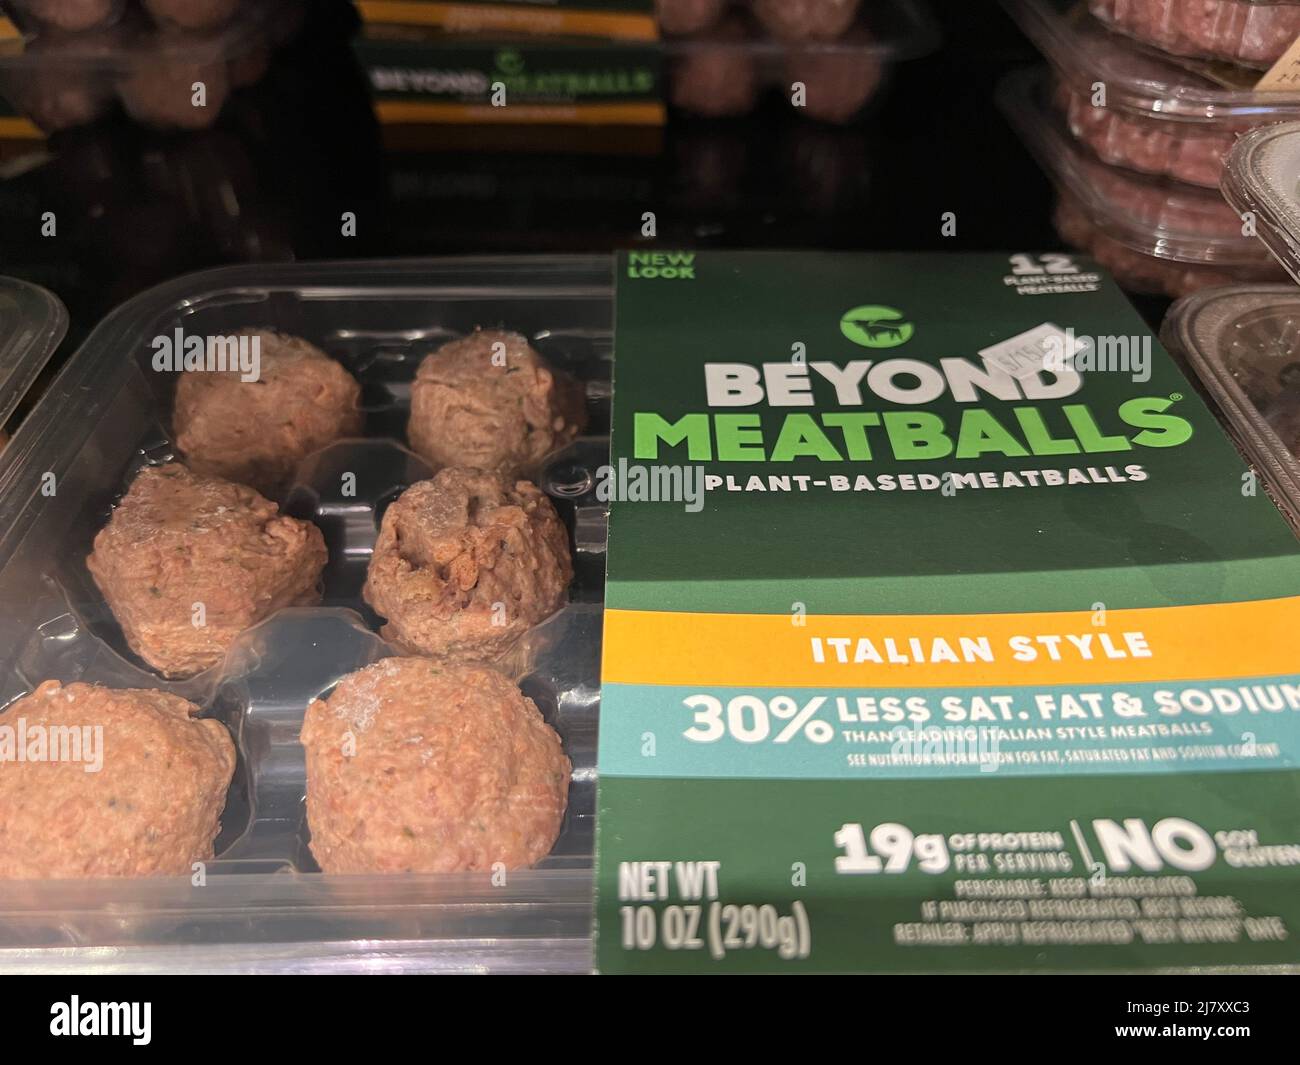 Beyond Meatballs, plant-based meatballs, with new packaging on the refrigerator shelf at a grocery store. Stock Photo